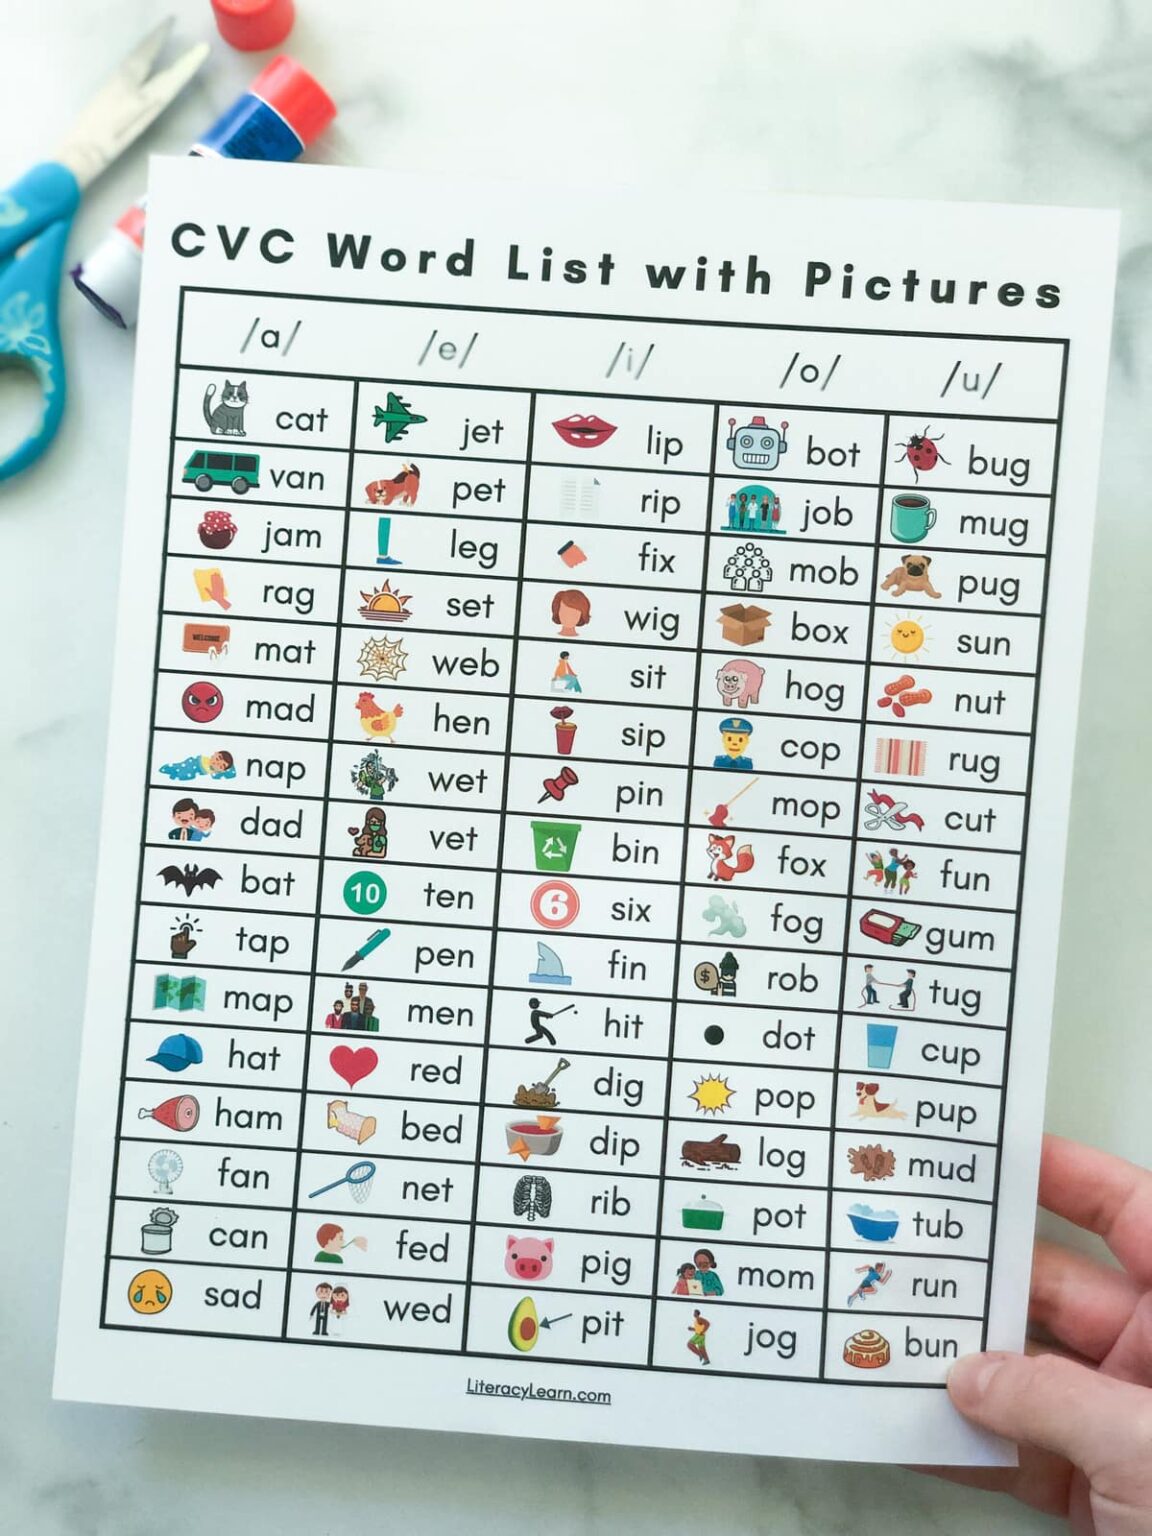 80-cvc-words-with-pictures-printable-worksheets-literacy-learn